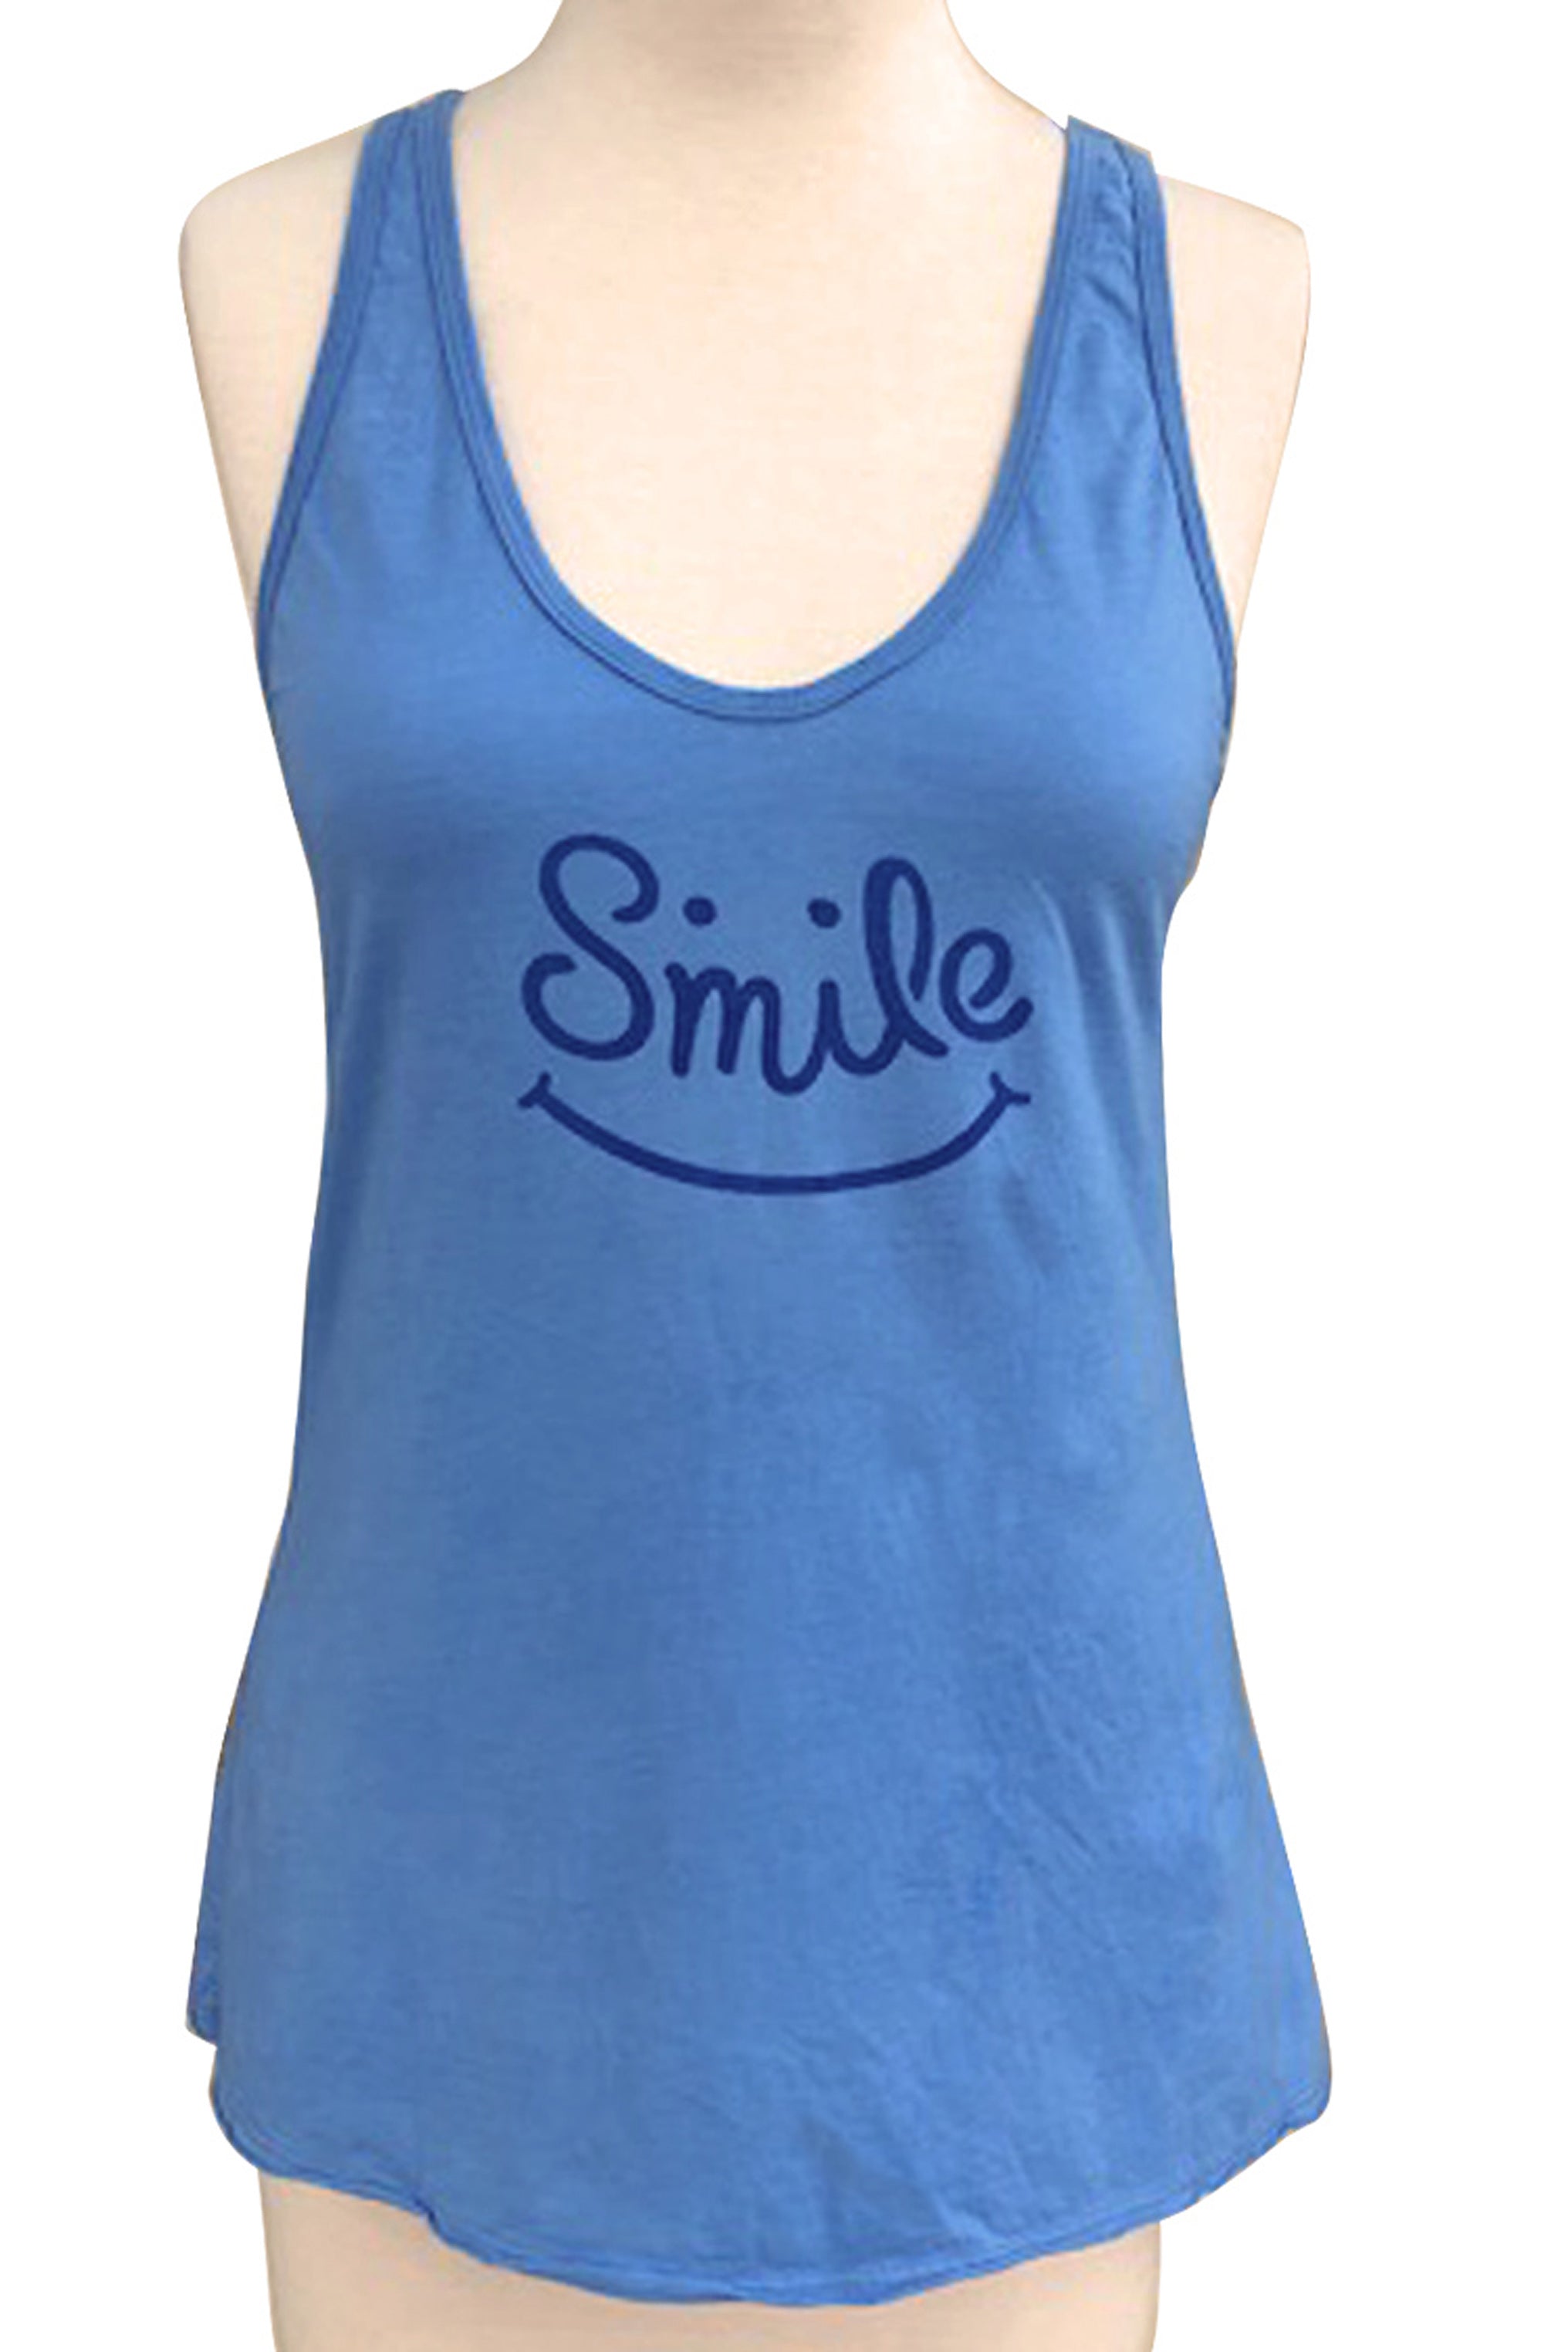 SWEET VIRTUES-Happiness Printed Cotton Racer Back Tunic Tank